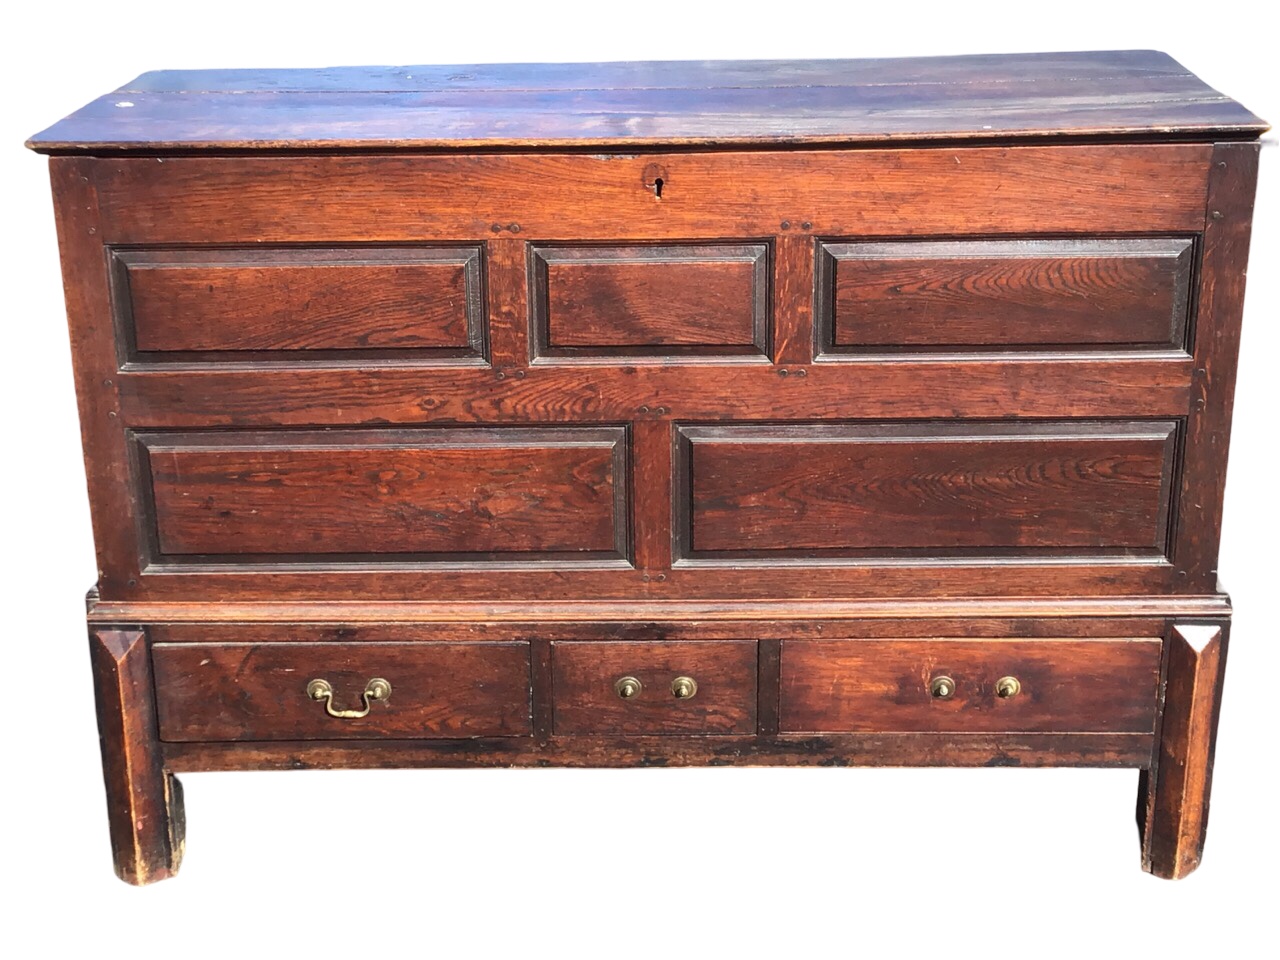 A C18th oak mule chest with rectangular top with fielded panelled front above three drawers